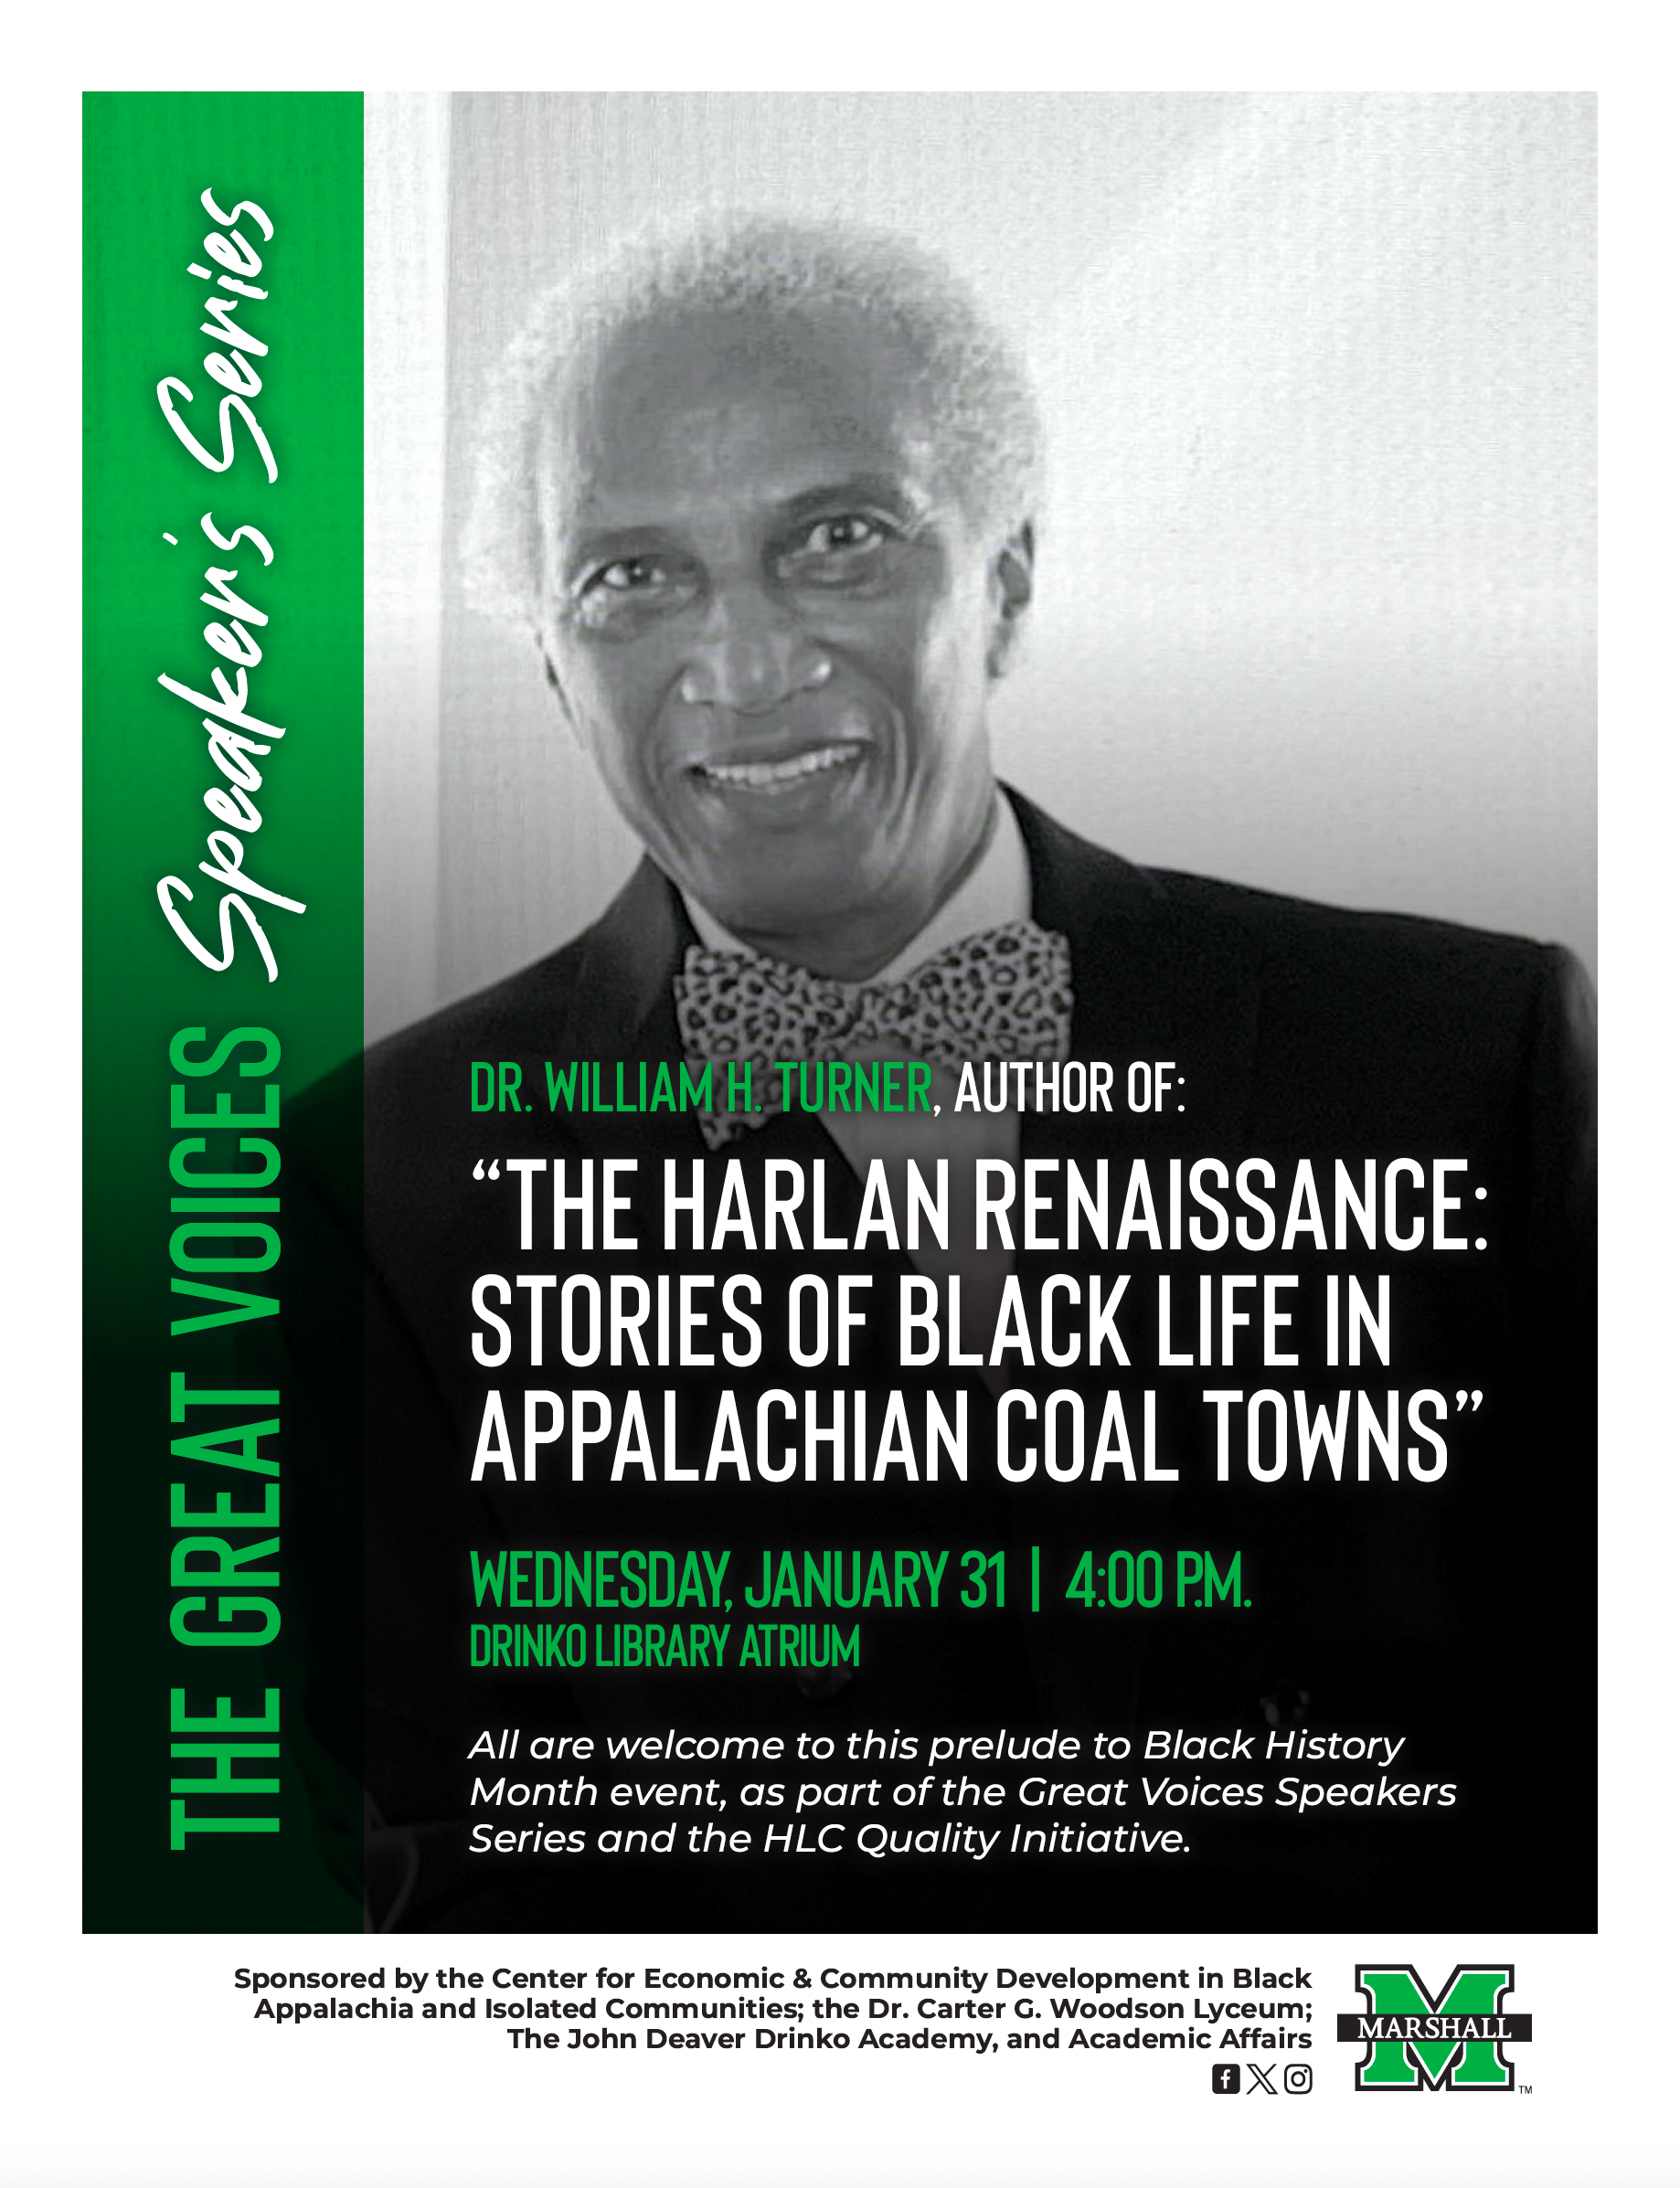 The Harlan Renaissance: Stories of Black Life in Appalachian Coal Towns flyer